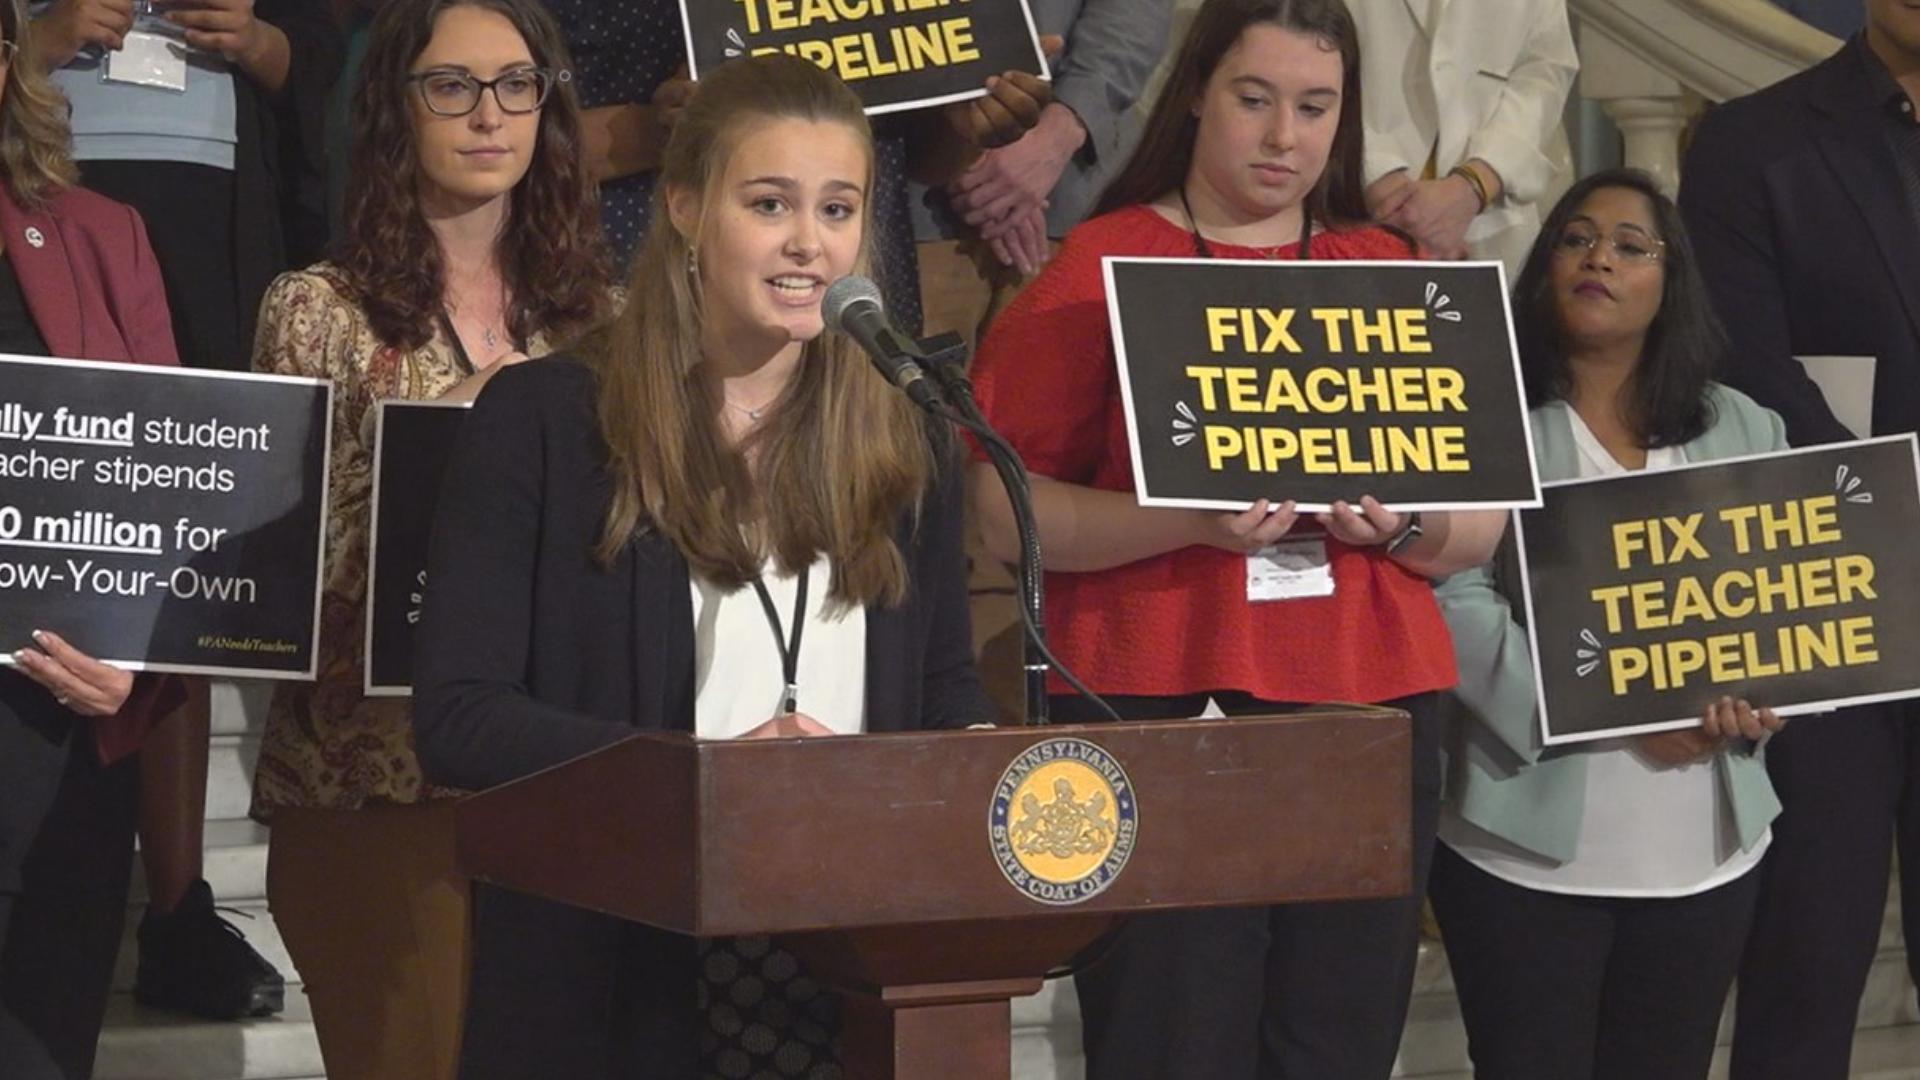 Future educators rallied at the Pennsylvania Capitol asking state lawmakers to help address the teacher shortage in the commonwealth.